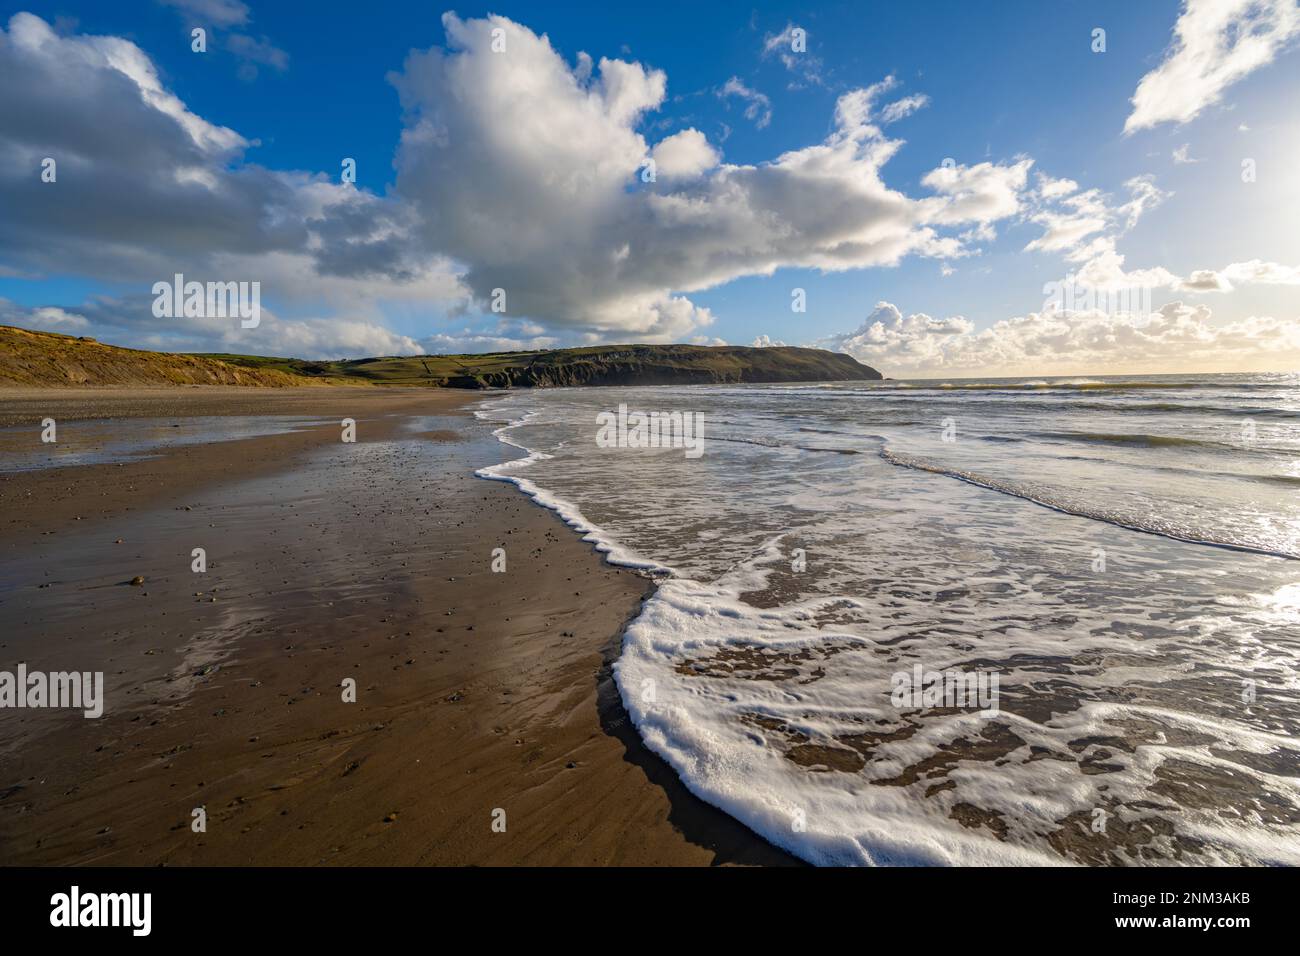 Waves breaking on the beach at Porth Neigwl bay also known as Hells mouth on the Llyn Peninsula near Llanengan North Wales. Stock Photo